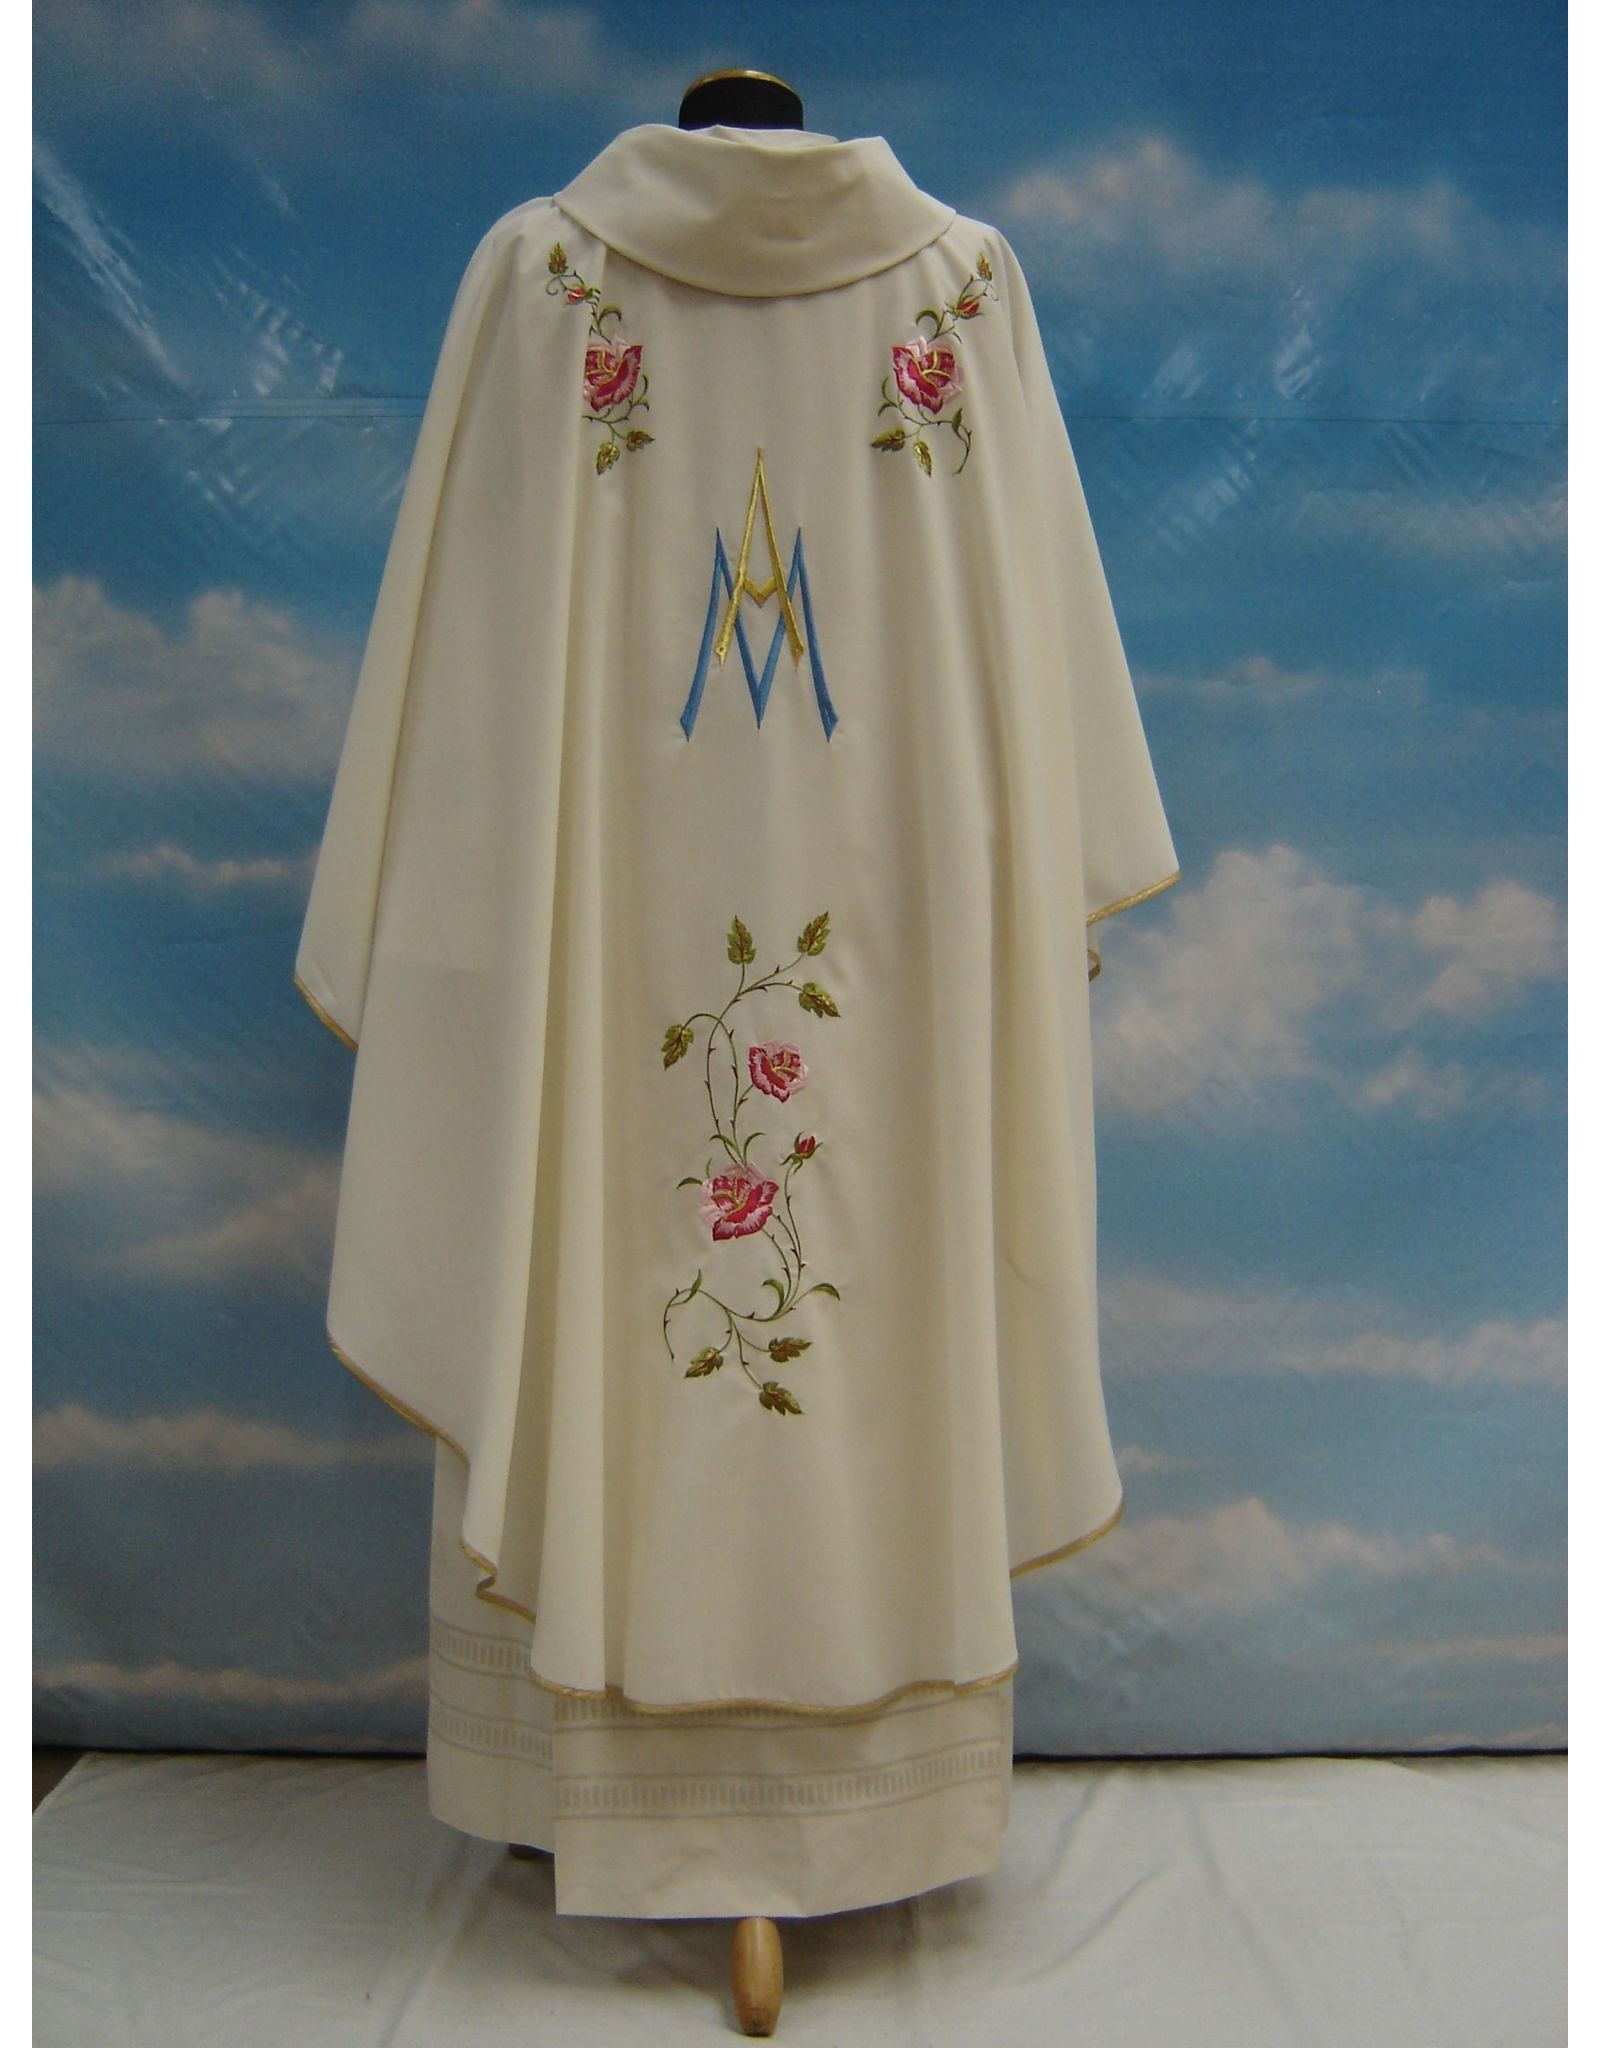 Solivari Marian Chasuble - Our Lady of Guadalupe